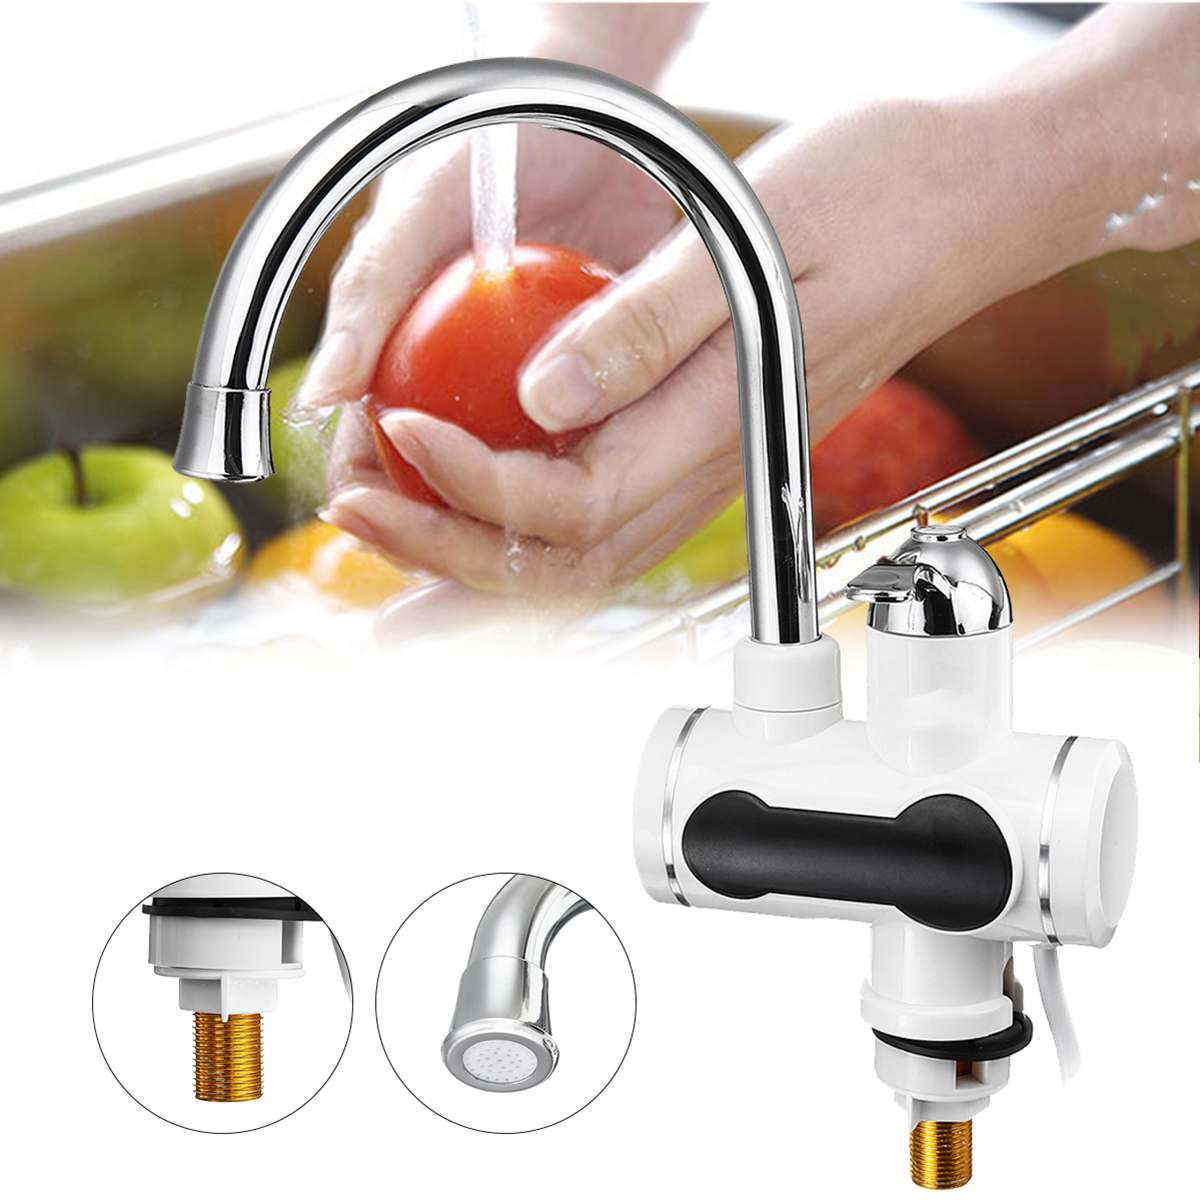 Efficient 3000W Temperature Display Instant Hot Water Tap Tankless Electric Faucet Kitchen Instant Hot Faucet Water Heater